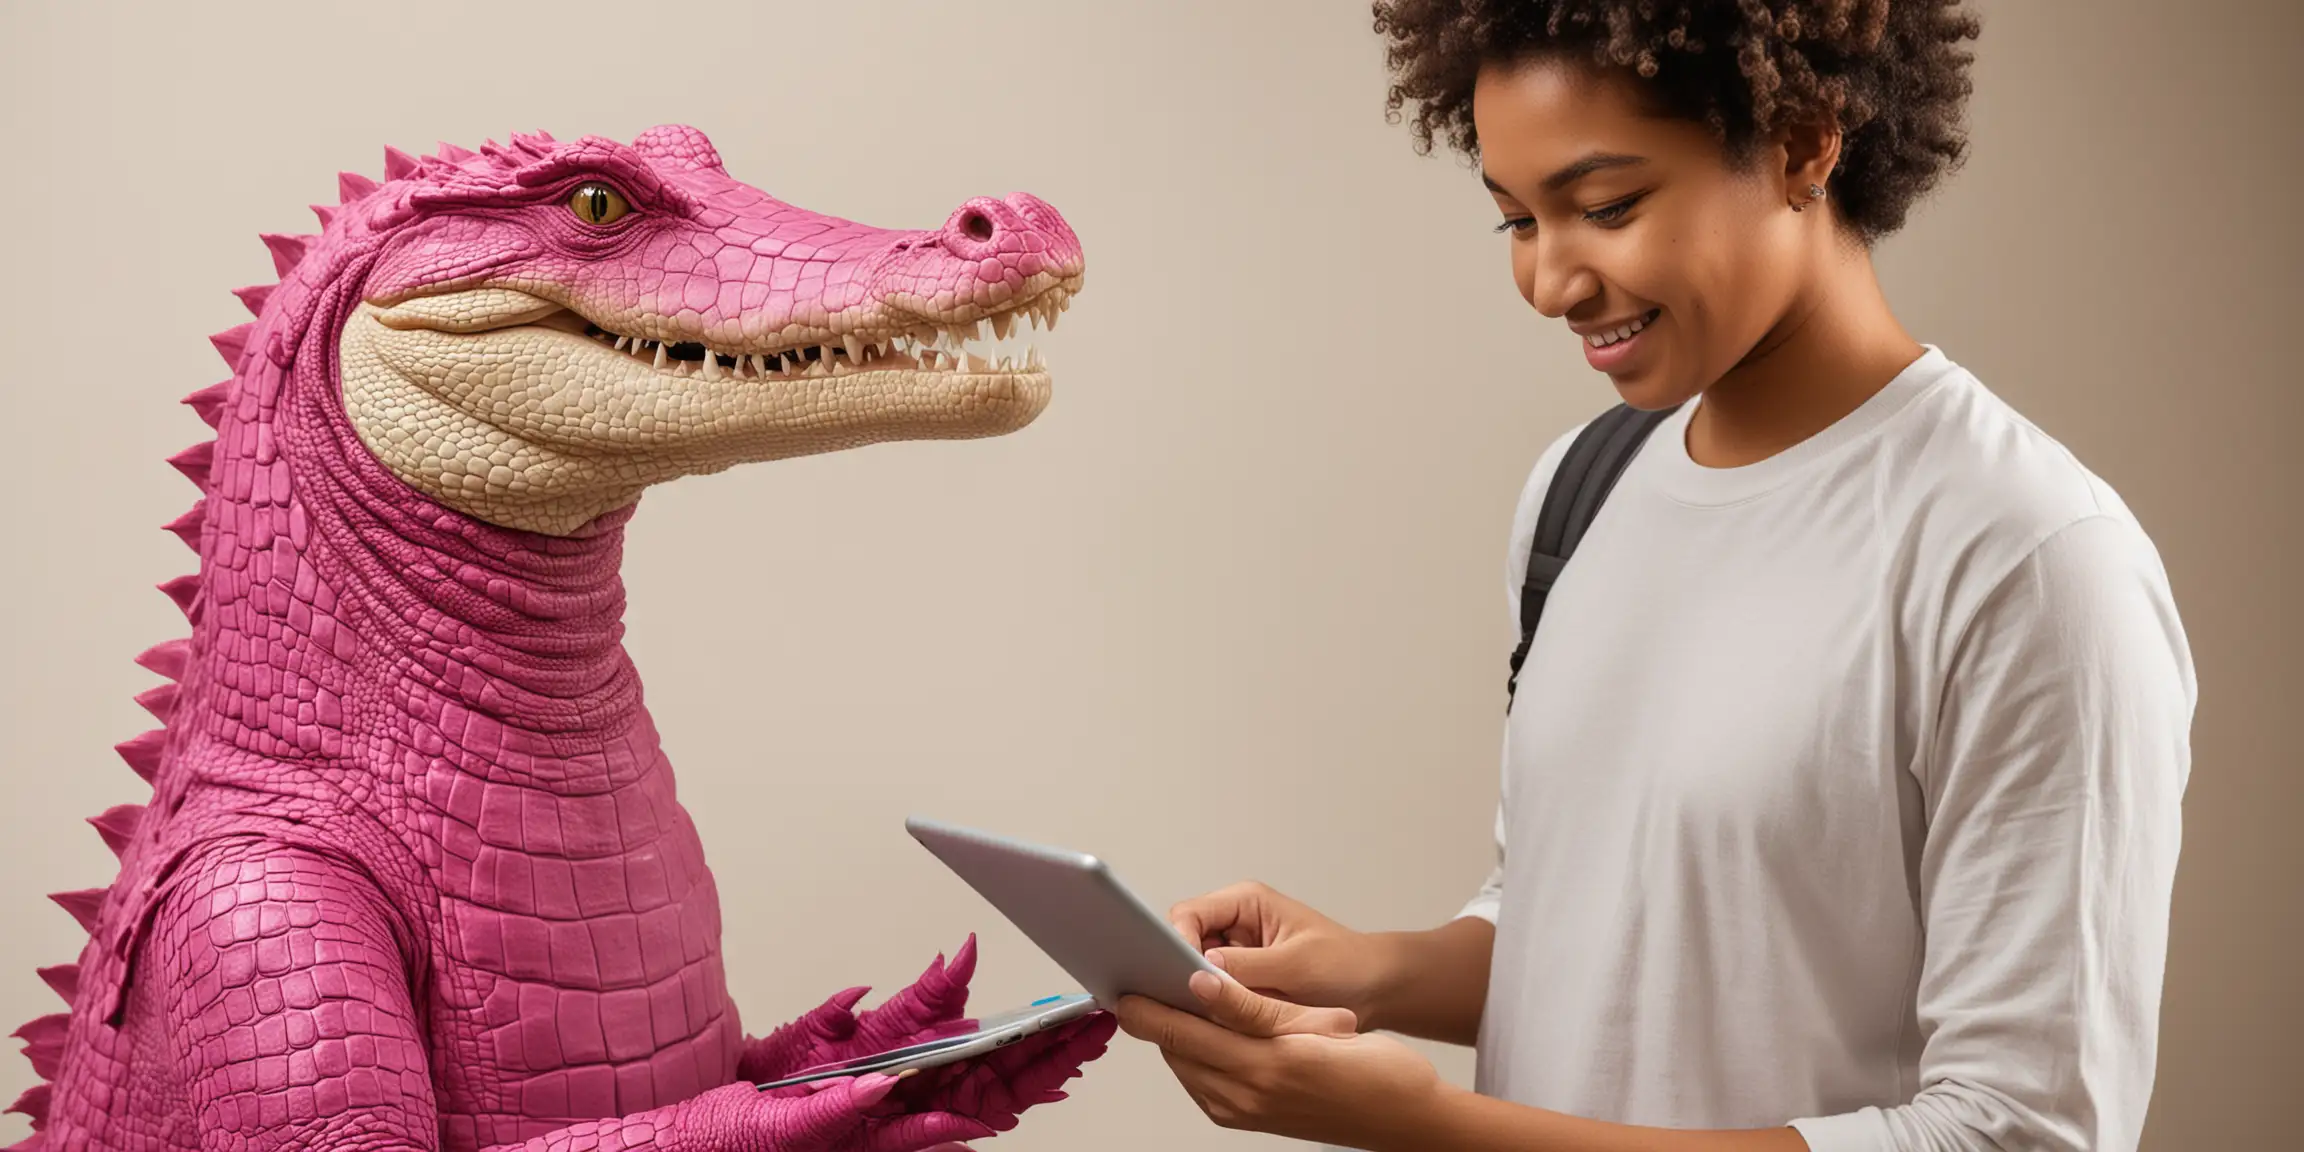 a magenta crocodile doing a questionnaire with a college student. The crocodile is holding an ipad. The student is answering the questionnaire.